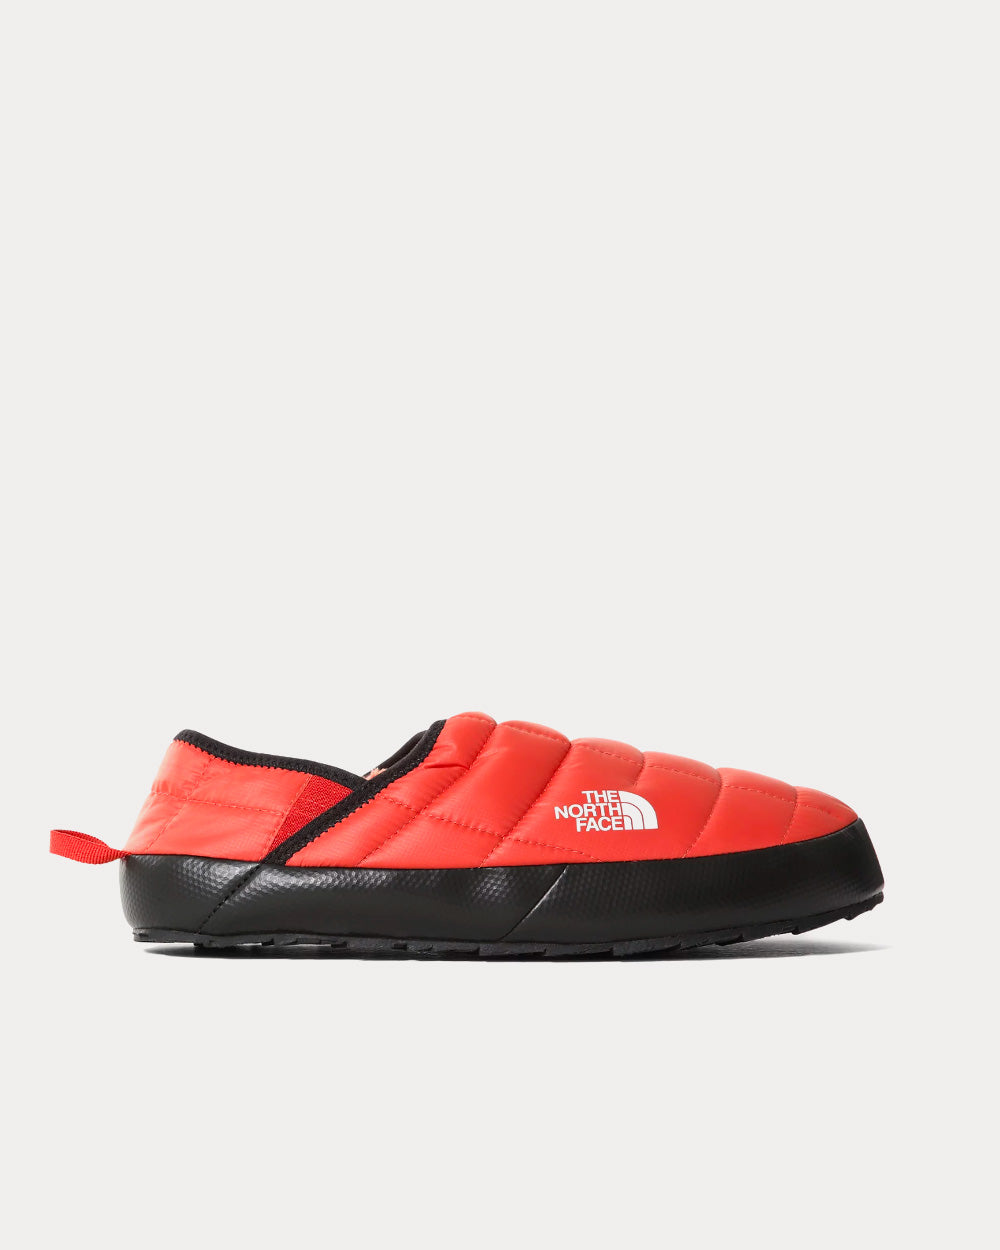 The North Face - Thermoball V Traction Mules Orange Slip Ons